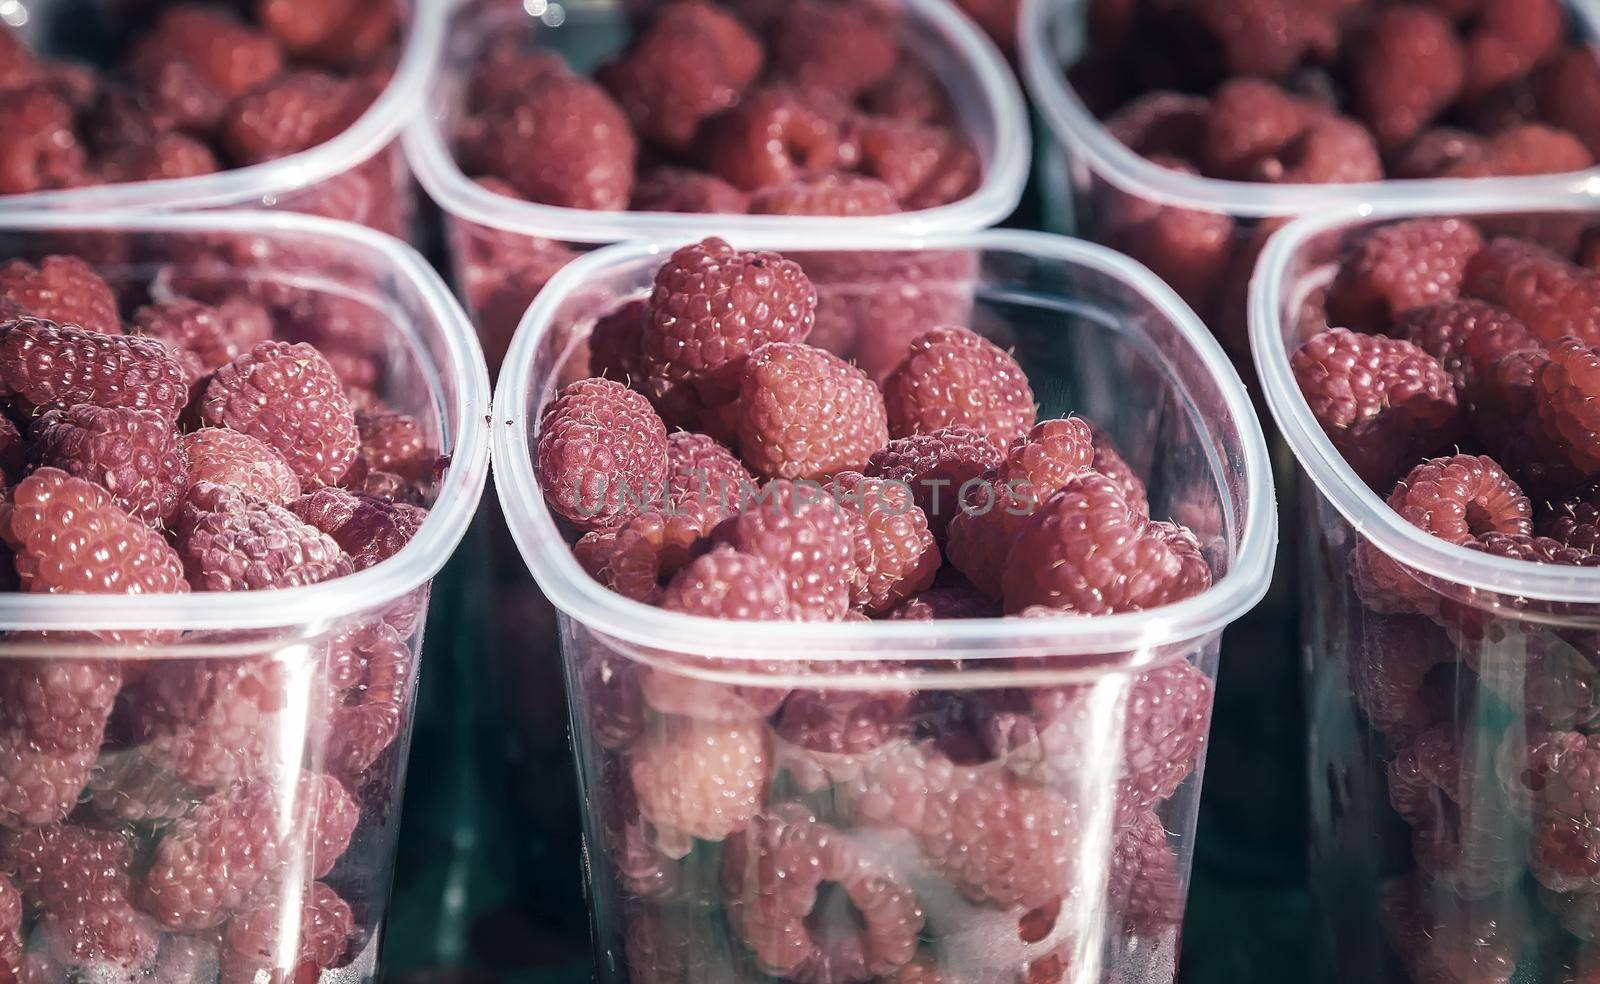 Delicious ripe raspberries in containers for sale. by georgina198